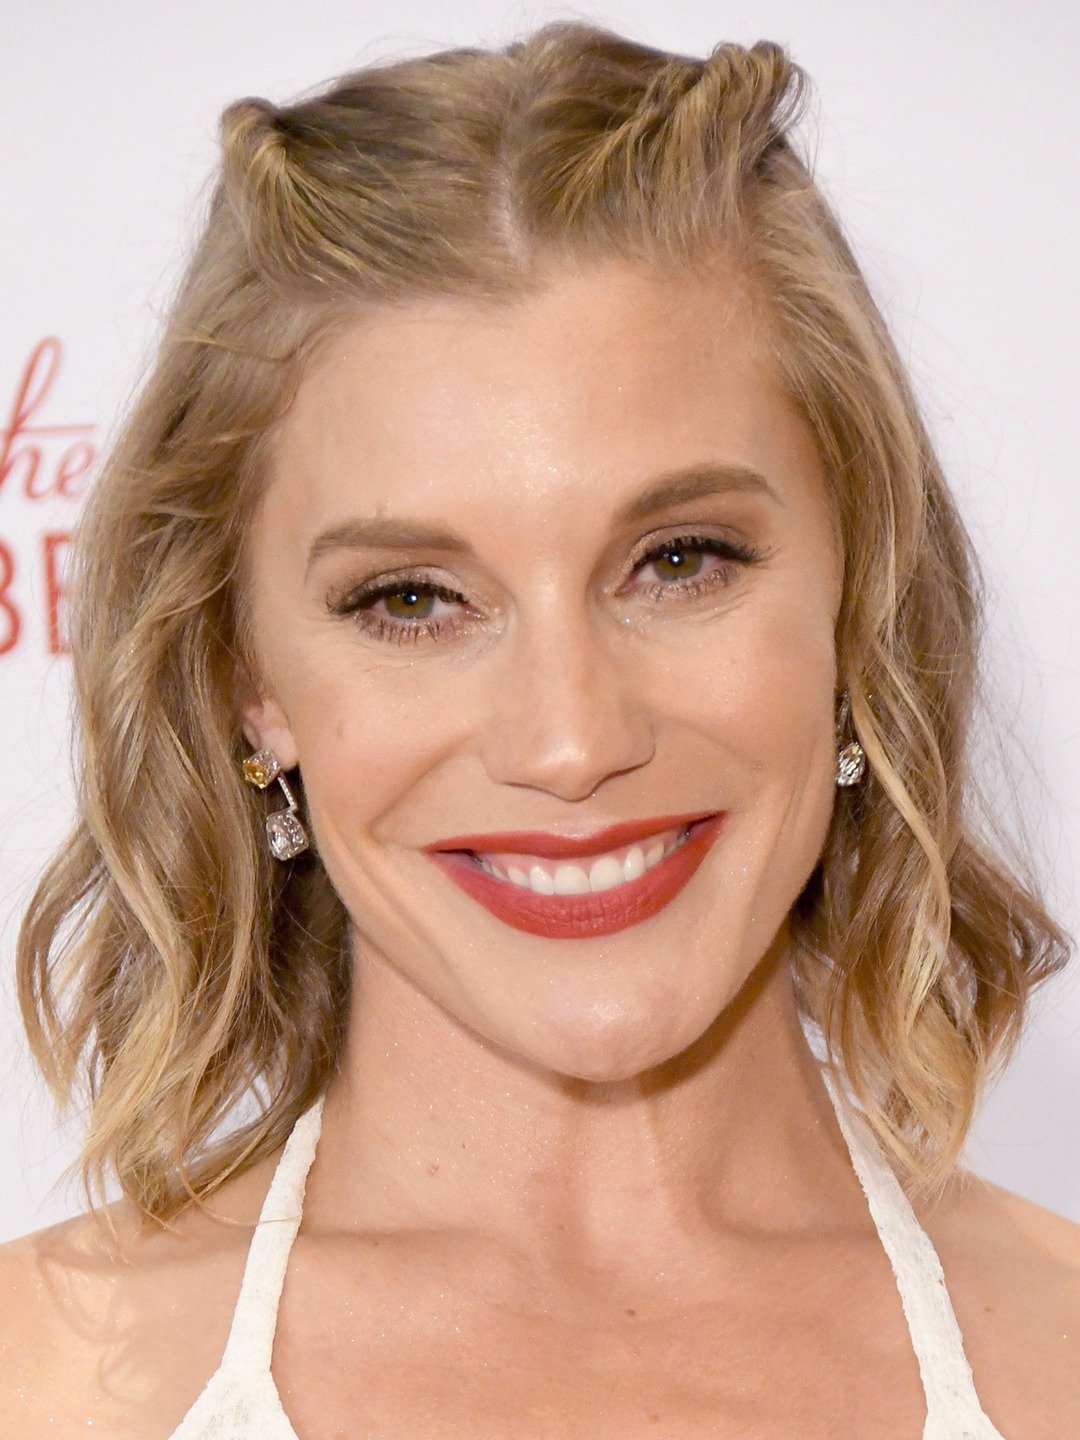 How tall is Katee Sackhoff?